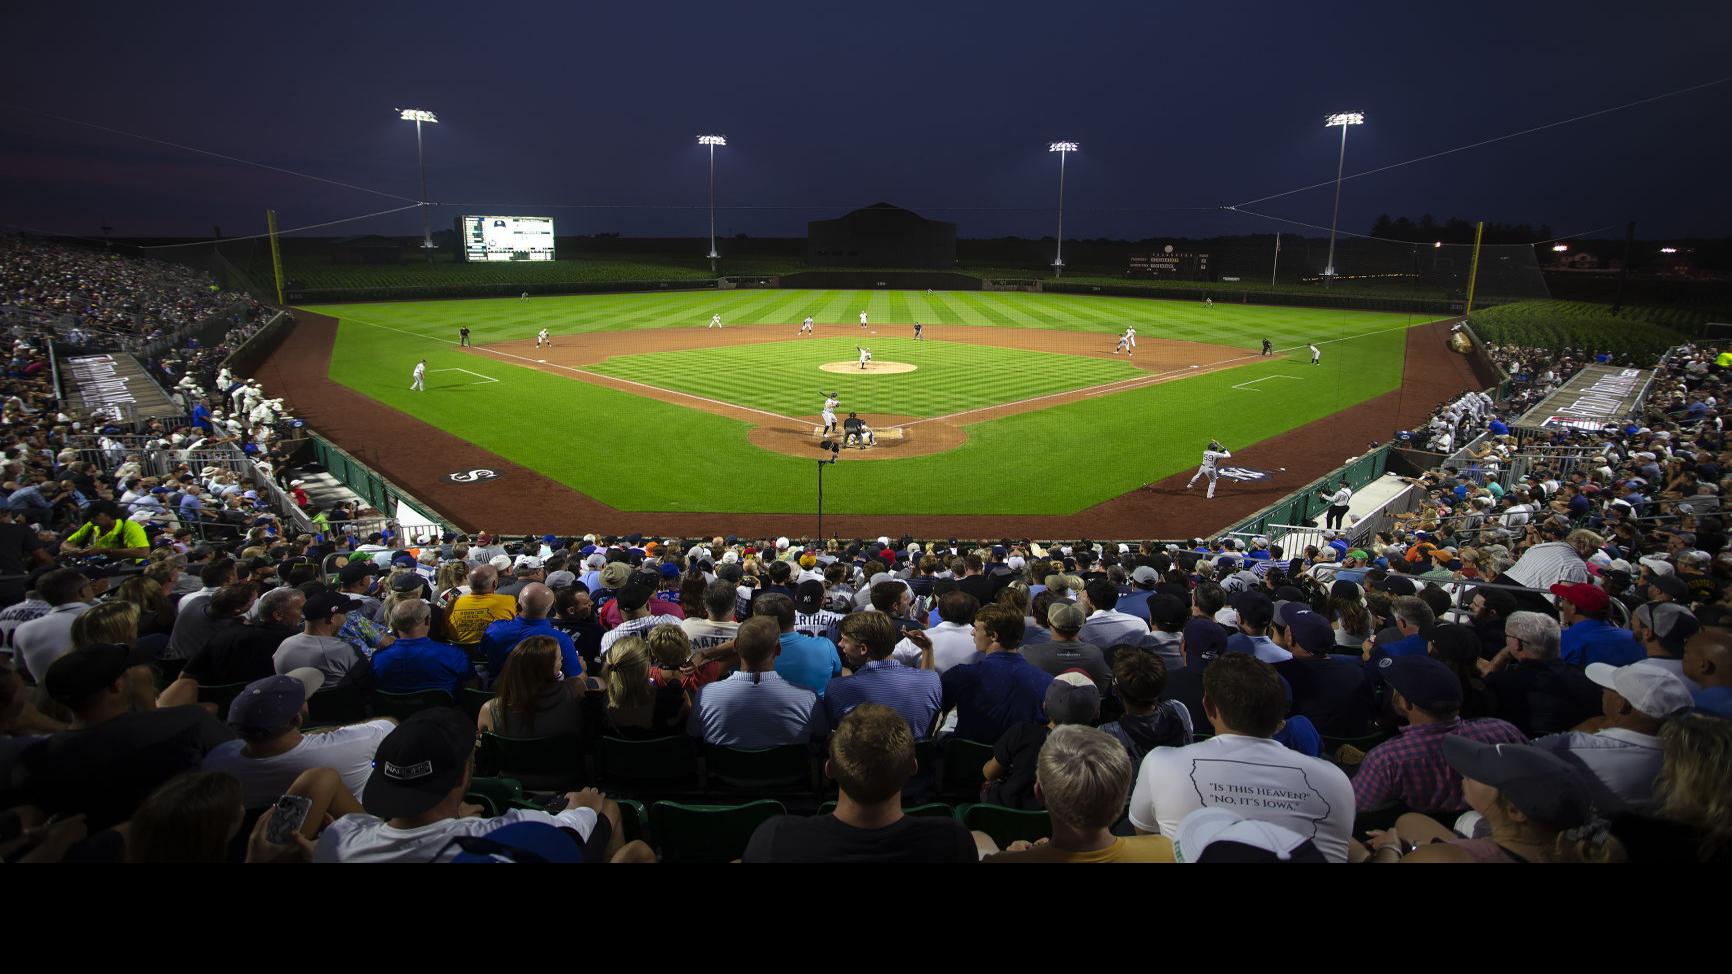 Bandits, Cubs and more all excited to play at 'Field of Dreams